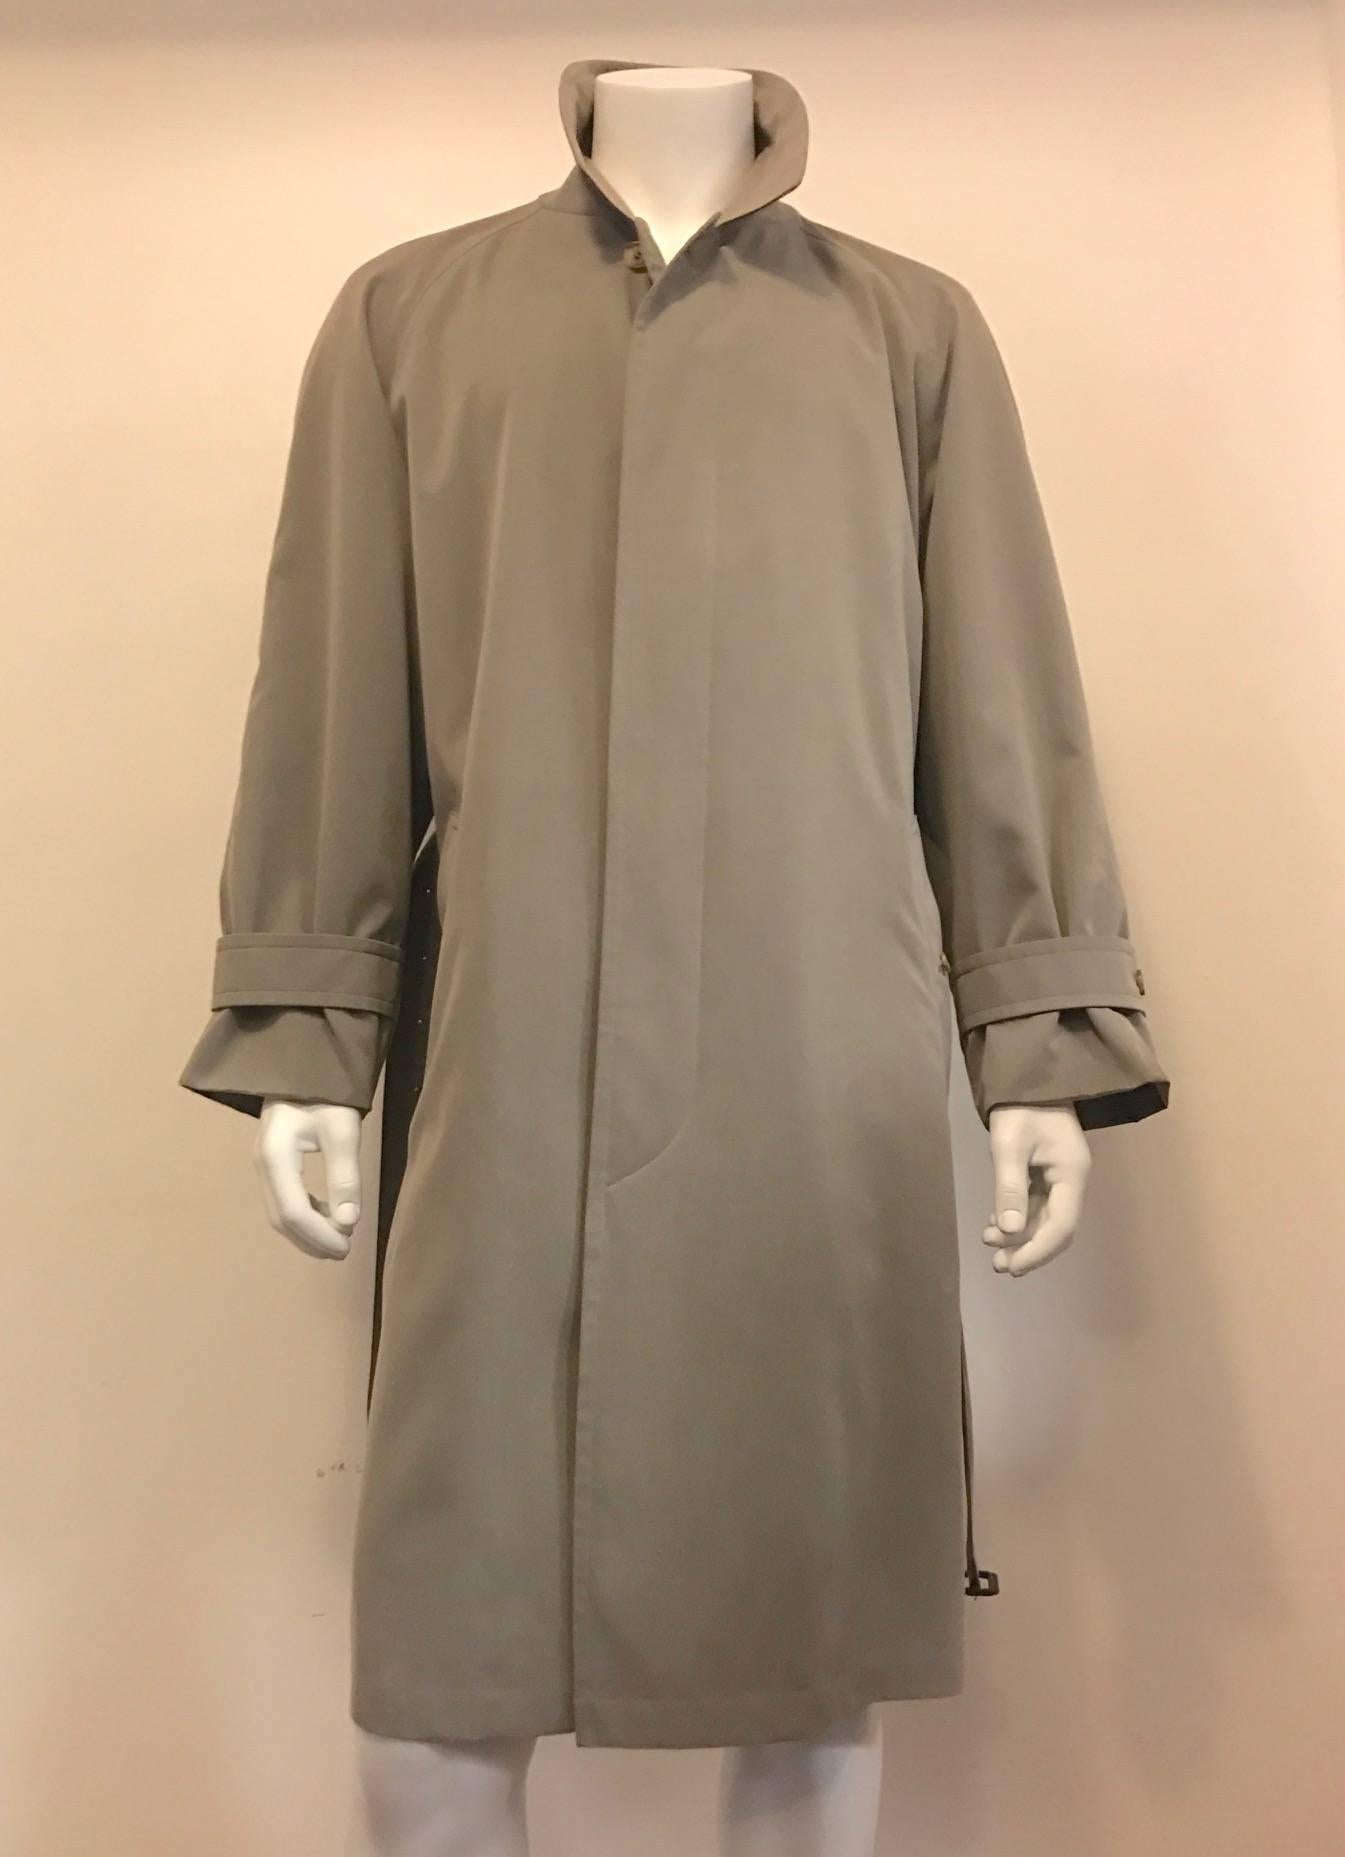 An elegant rainproof  trench coat with raglan sleeves, placket, cuff straps, a belt with leather wrapped buckle, a single vent with button closure if desired, two deep slit pockets, and one slit pocket inside.  Measures 50